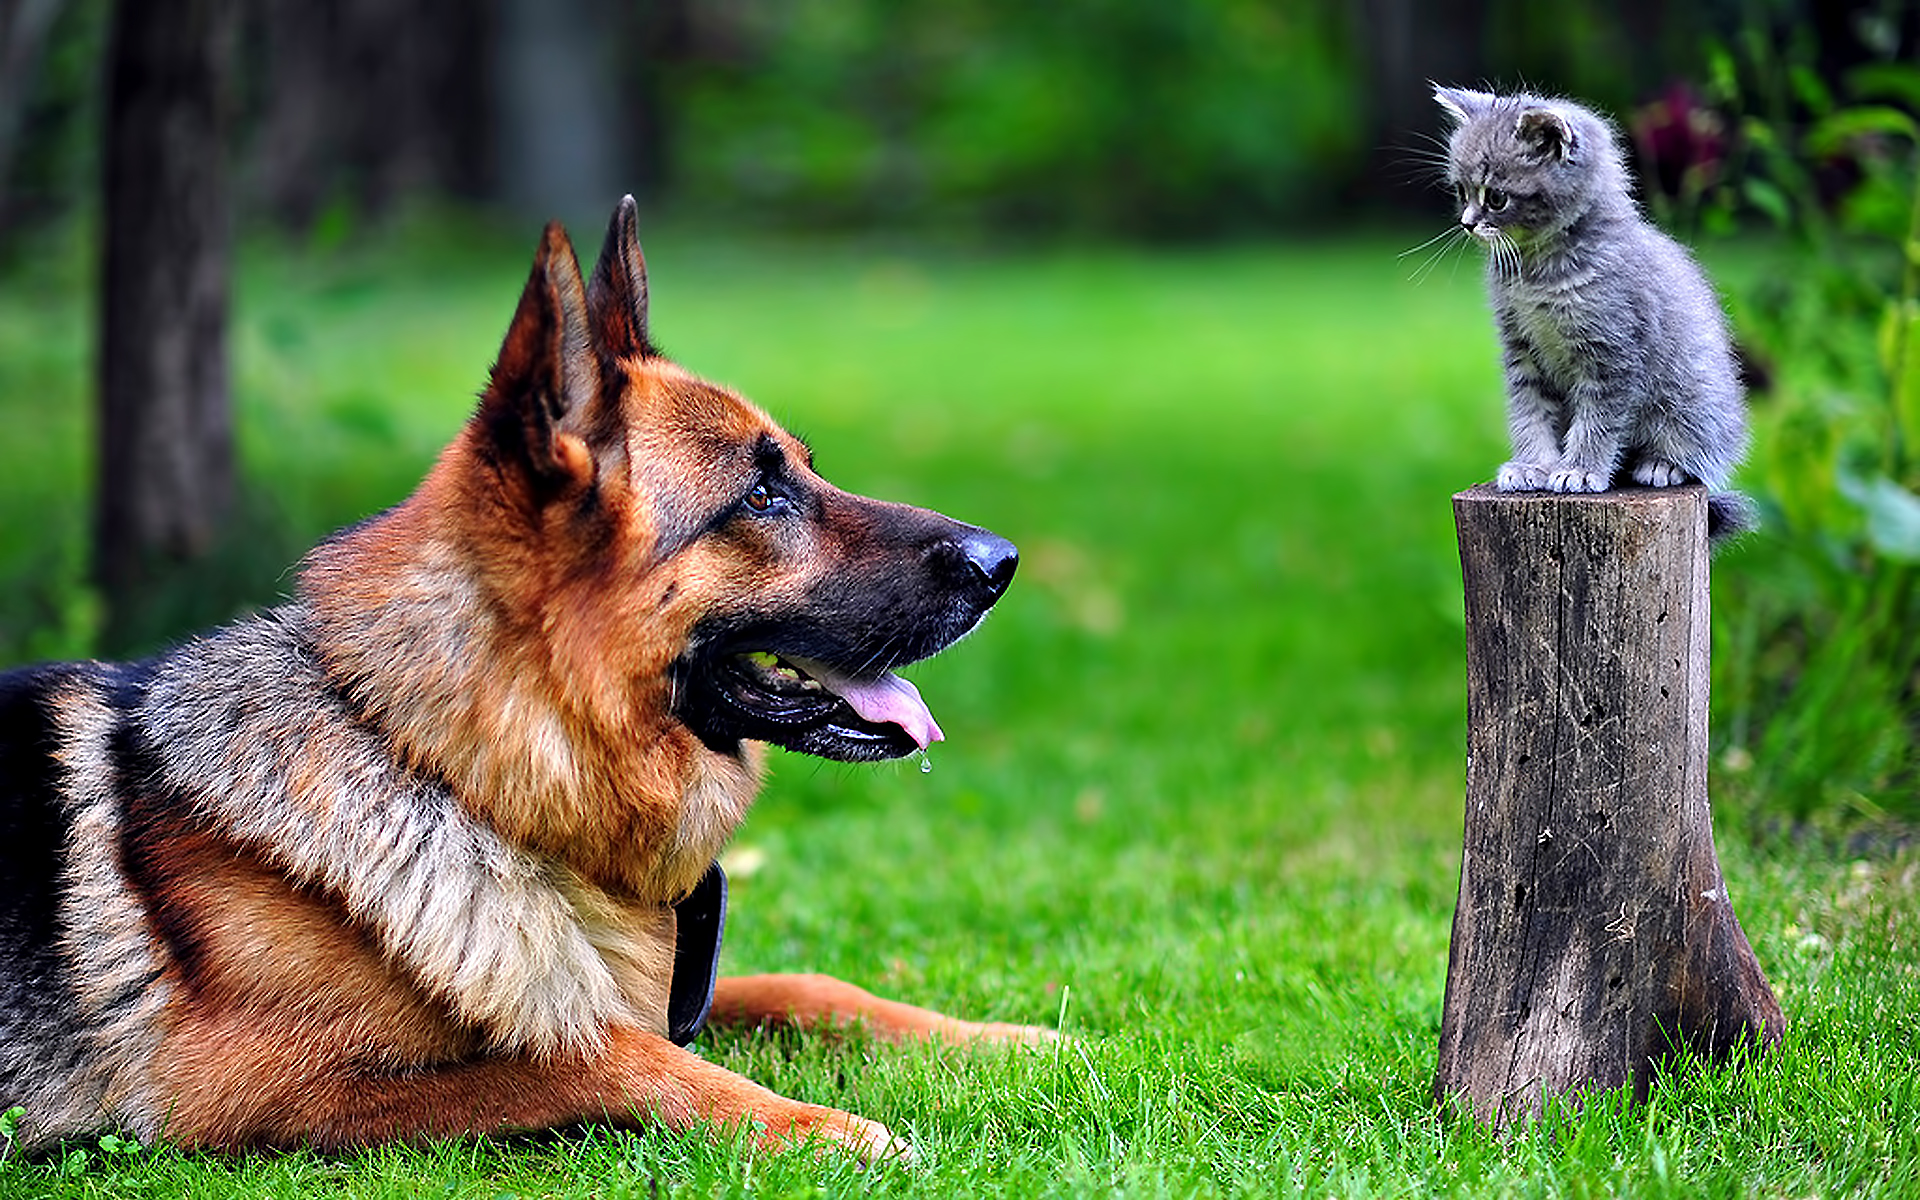 Cat & Dog HD for Phone